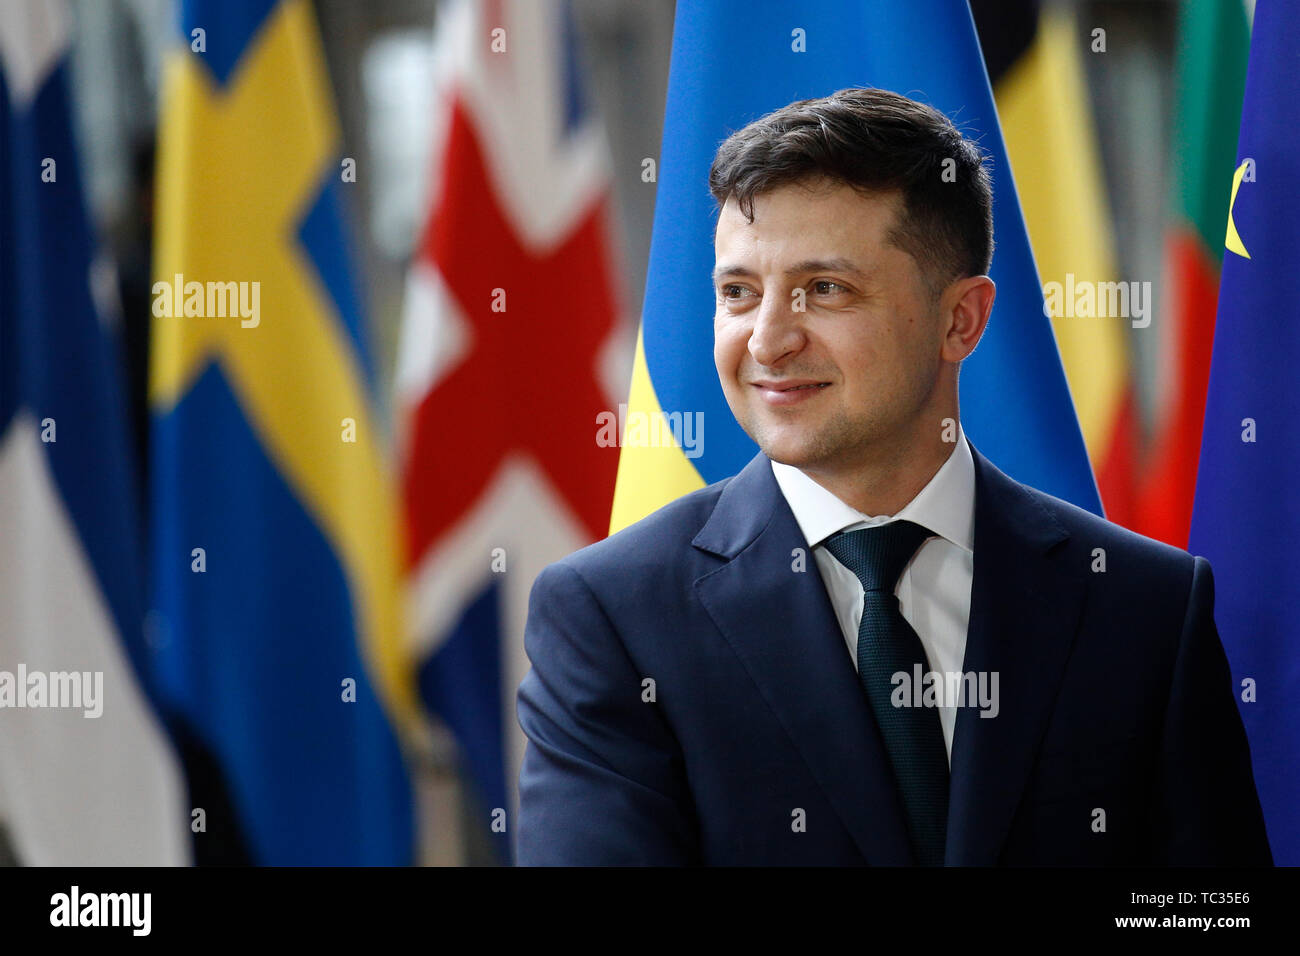 Brussels, Belgium. 5th June, 2019. Ukrainian President Volodymyr Zelensky is welcomed by European Council President Donald Tusk ahead of their meeting. Credit: ALEXANDROS MICHAILIDIS/Alamy Live News Stock Photo